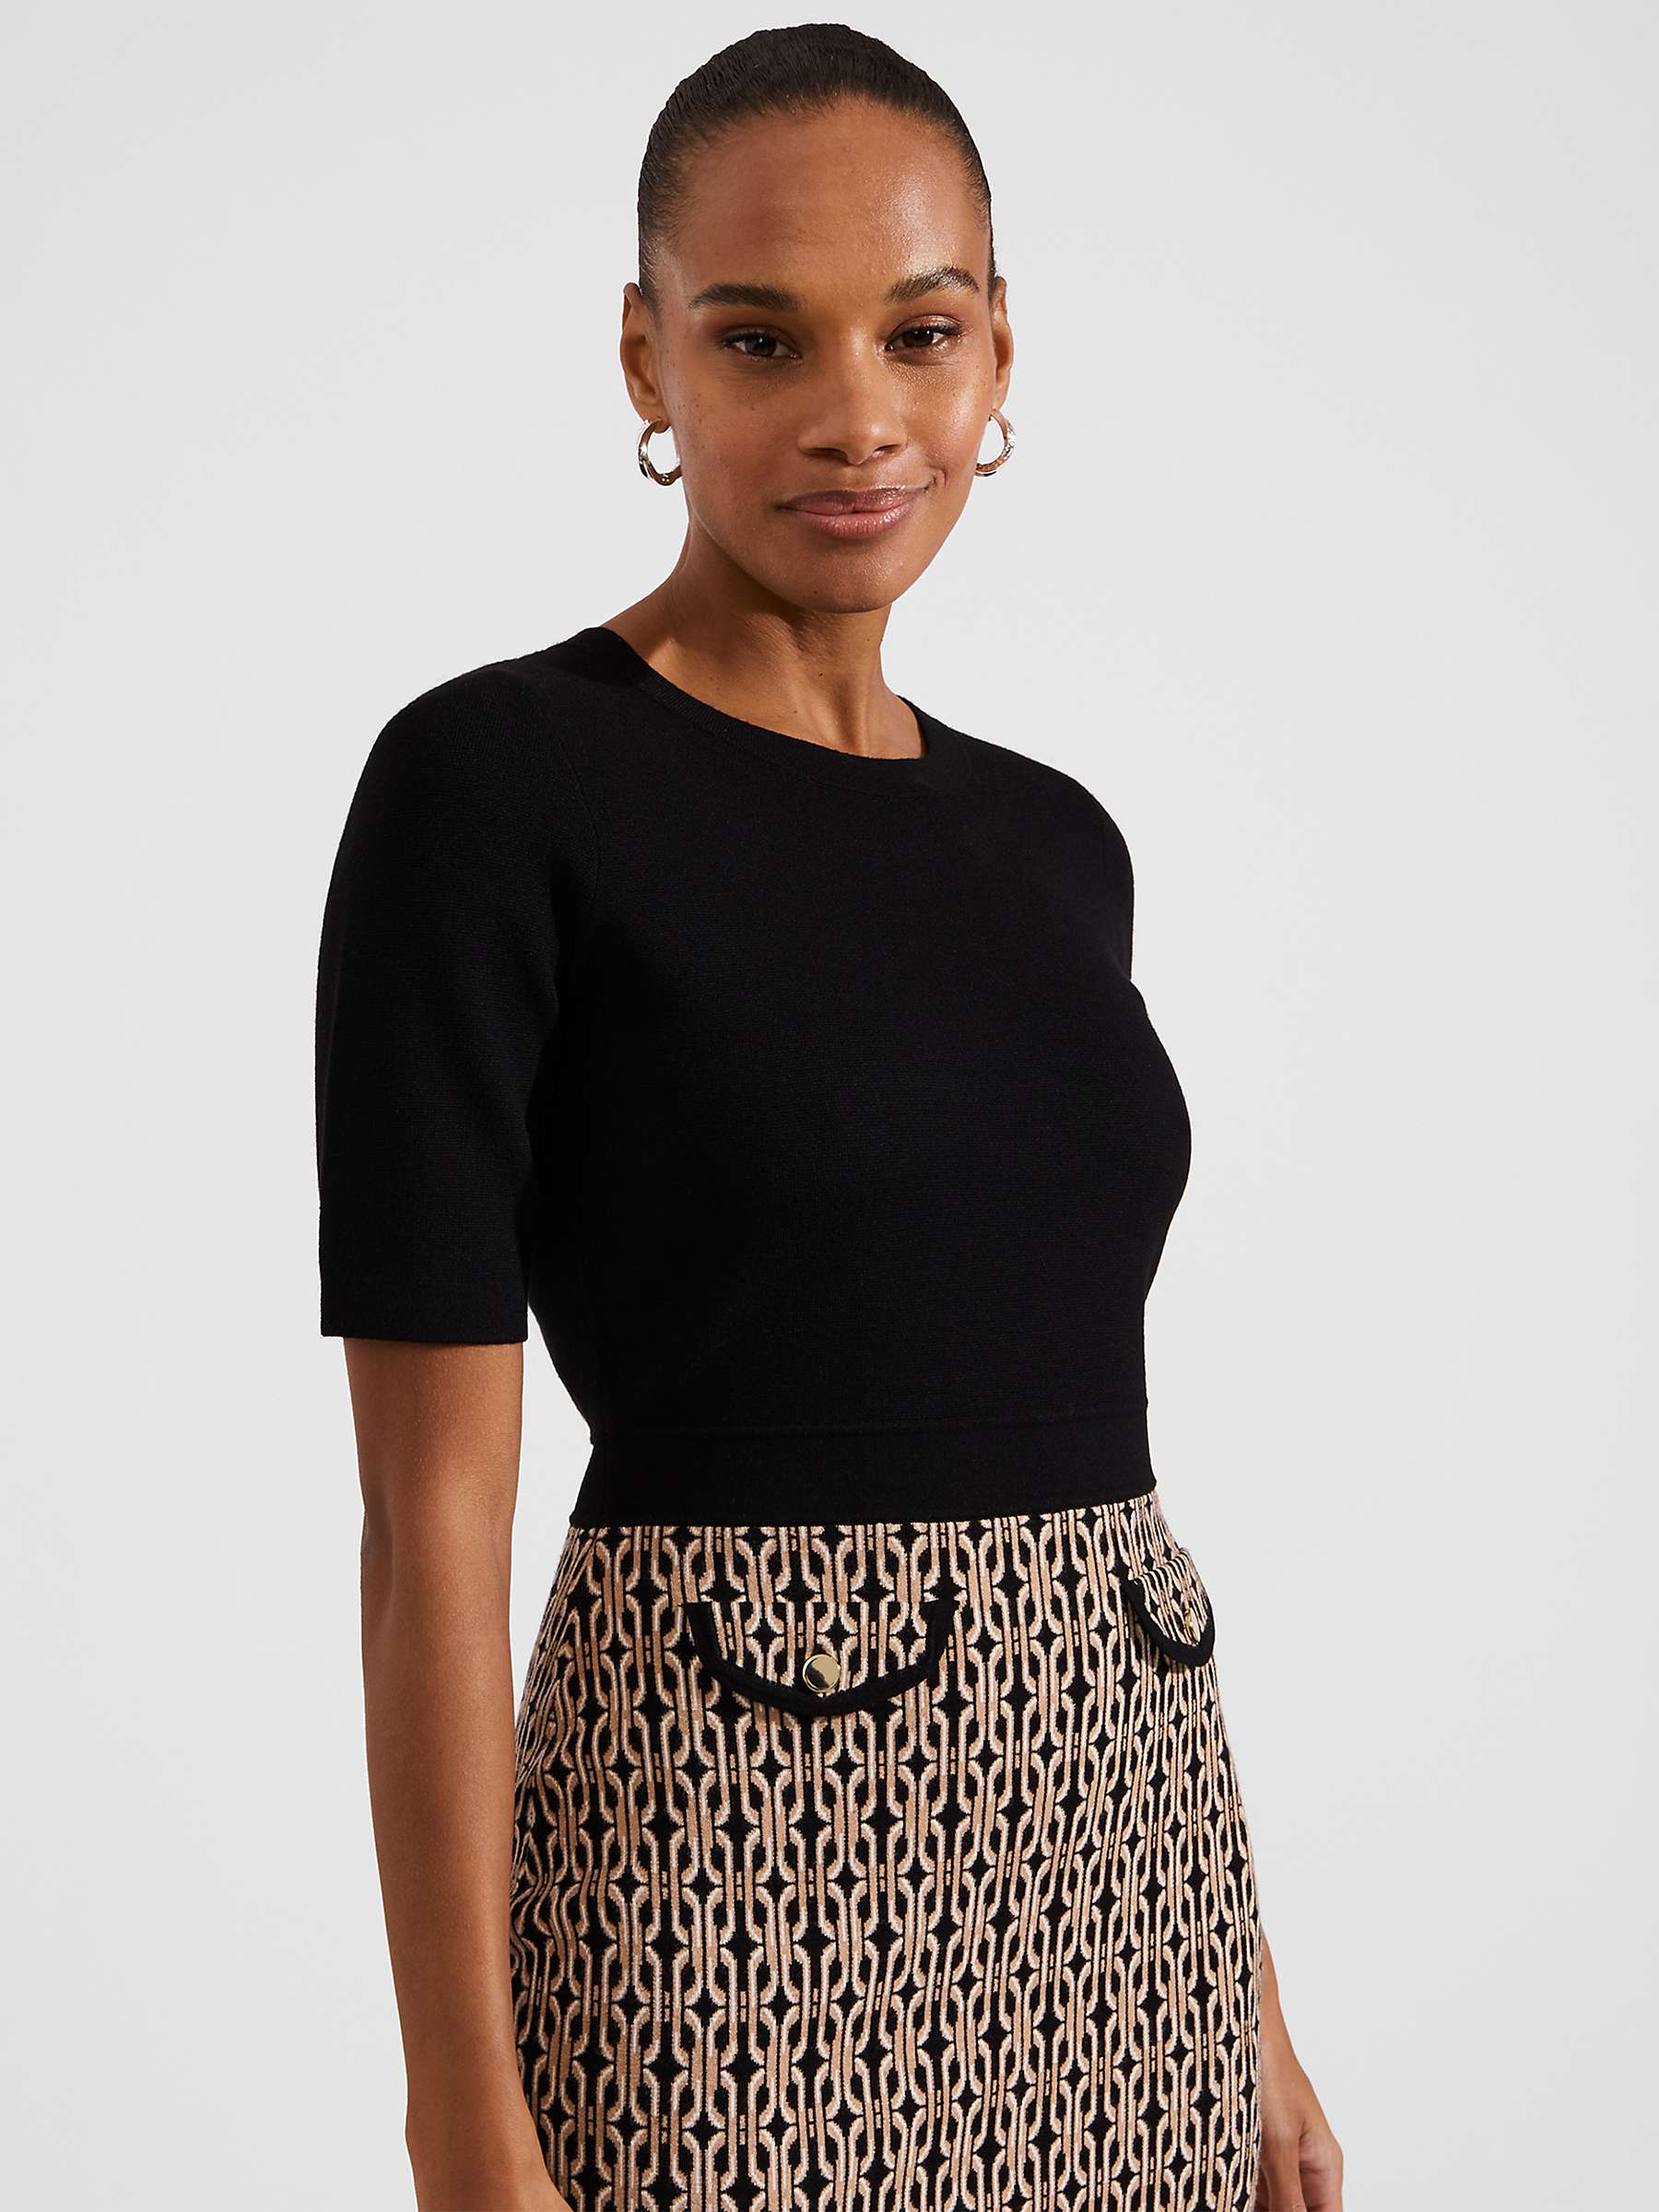 Buy Hobbs Perrie Abstract Print Knitted Dress, Black/Camel Online at johnlewis.com